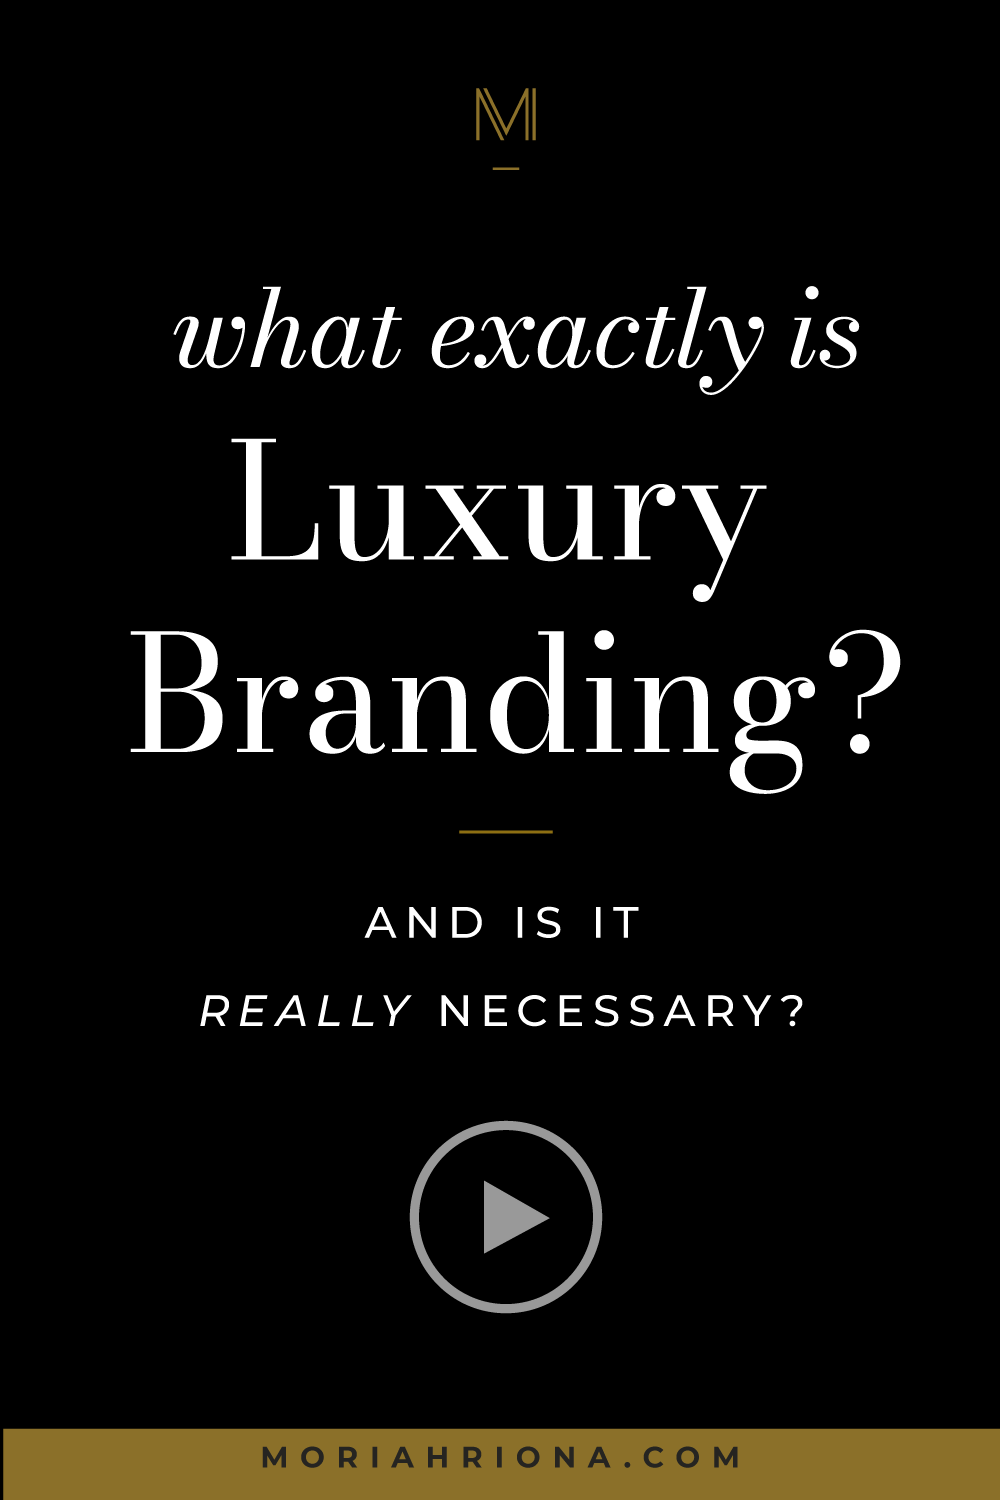 Are you wondering if building a luxury brand identity is the right move for your business? This blog post is for you! I’ll answer the question, “What is luxury branding?” and you’ll learn why a luxury branding strategy isn’t for everyone. #luxurybrand #entrepreneurship #lifecoach #brandingtips